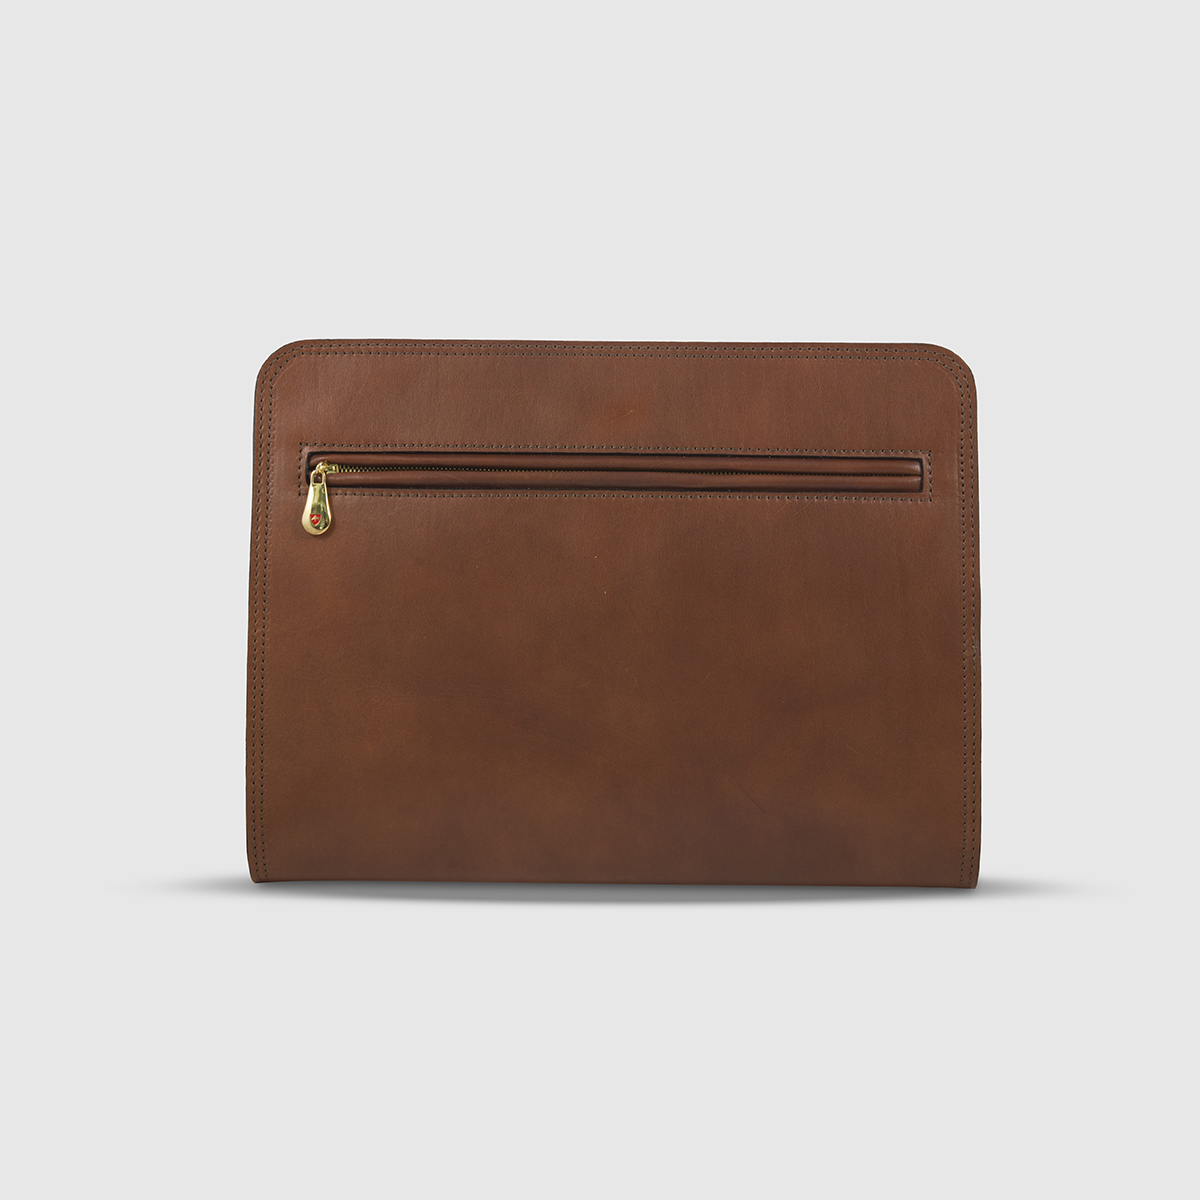 Athison Brown Leather Pouch Athison on sale 2022 2